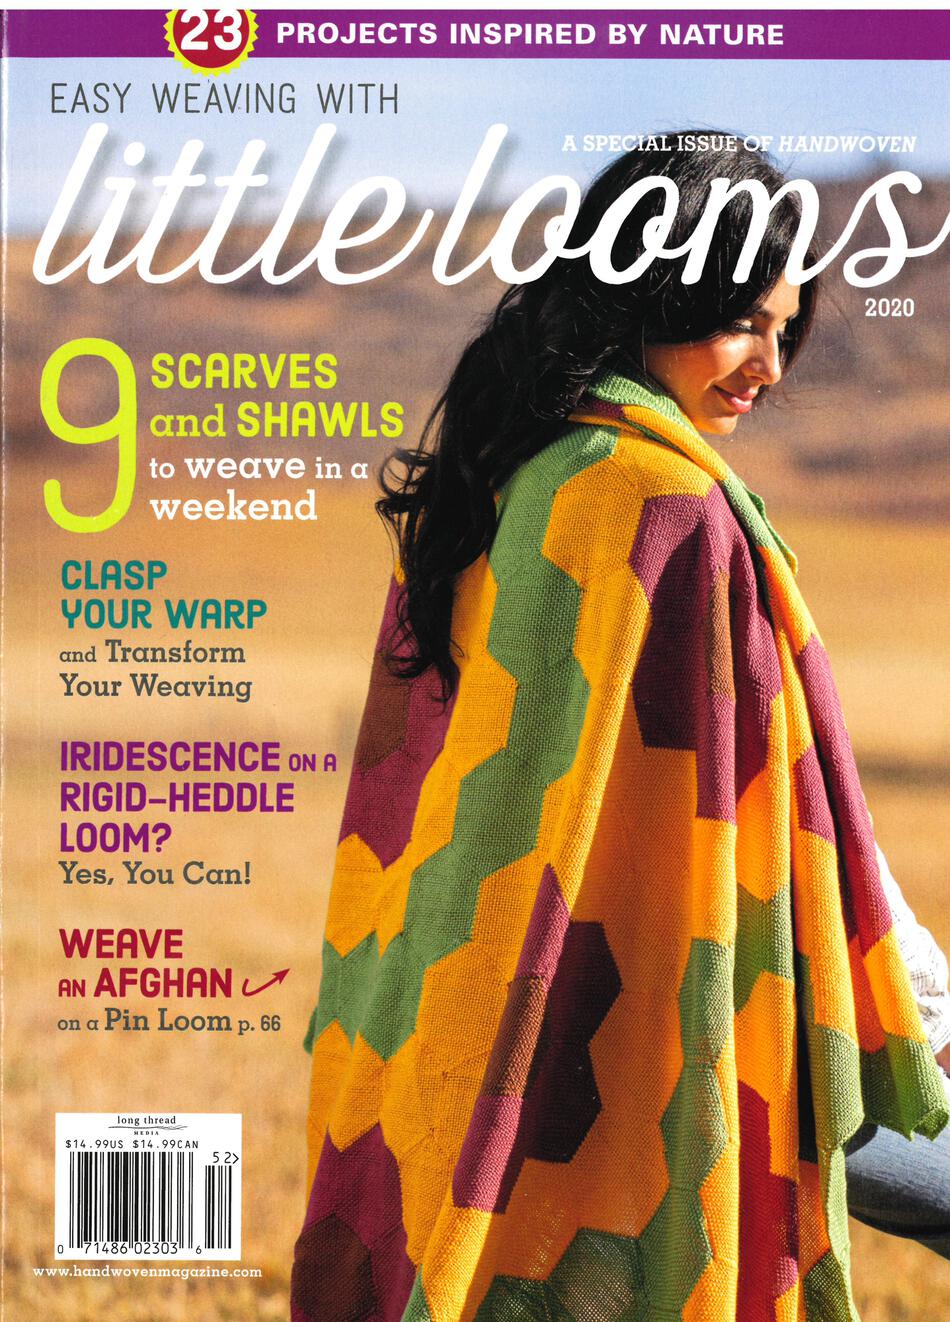 Weaving Magazines Easy Weaving with Little Looms a Special Issue of Handwoven 2020